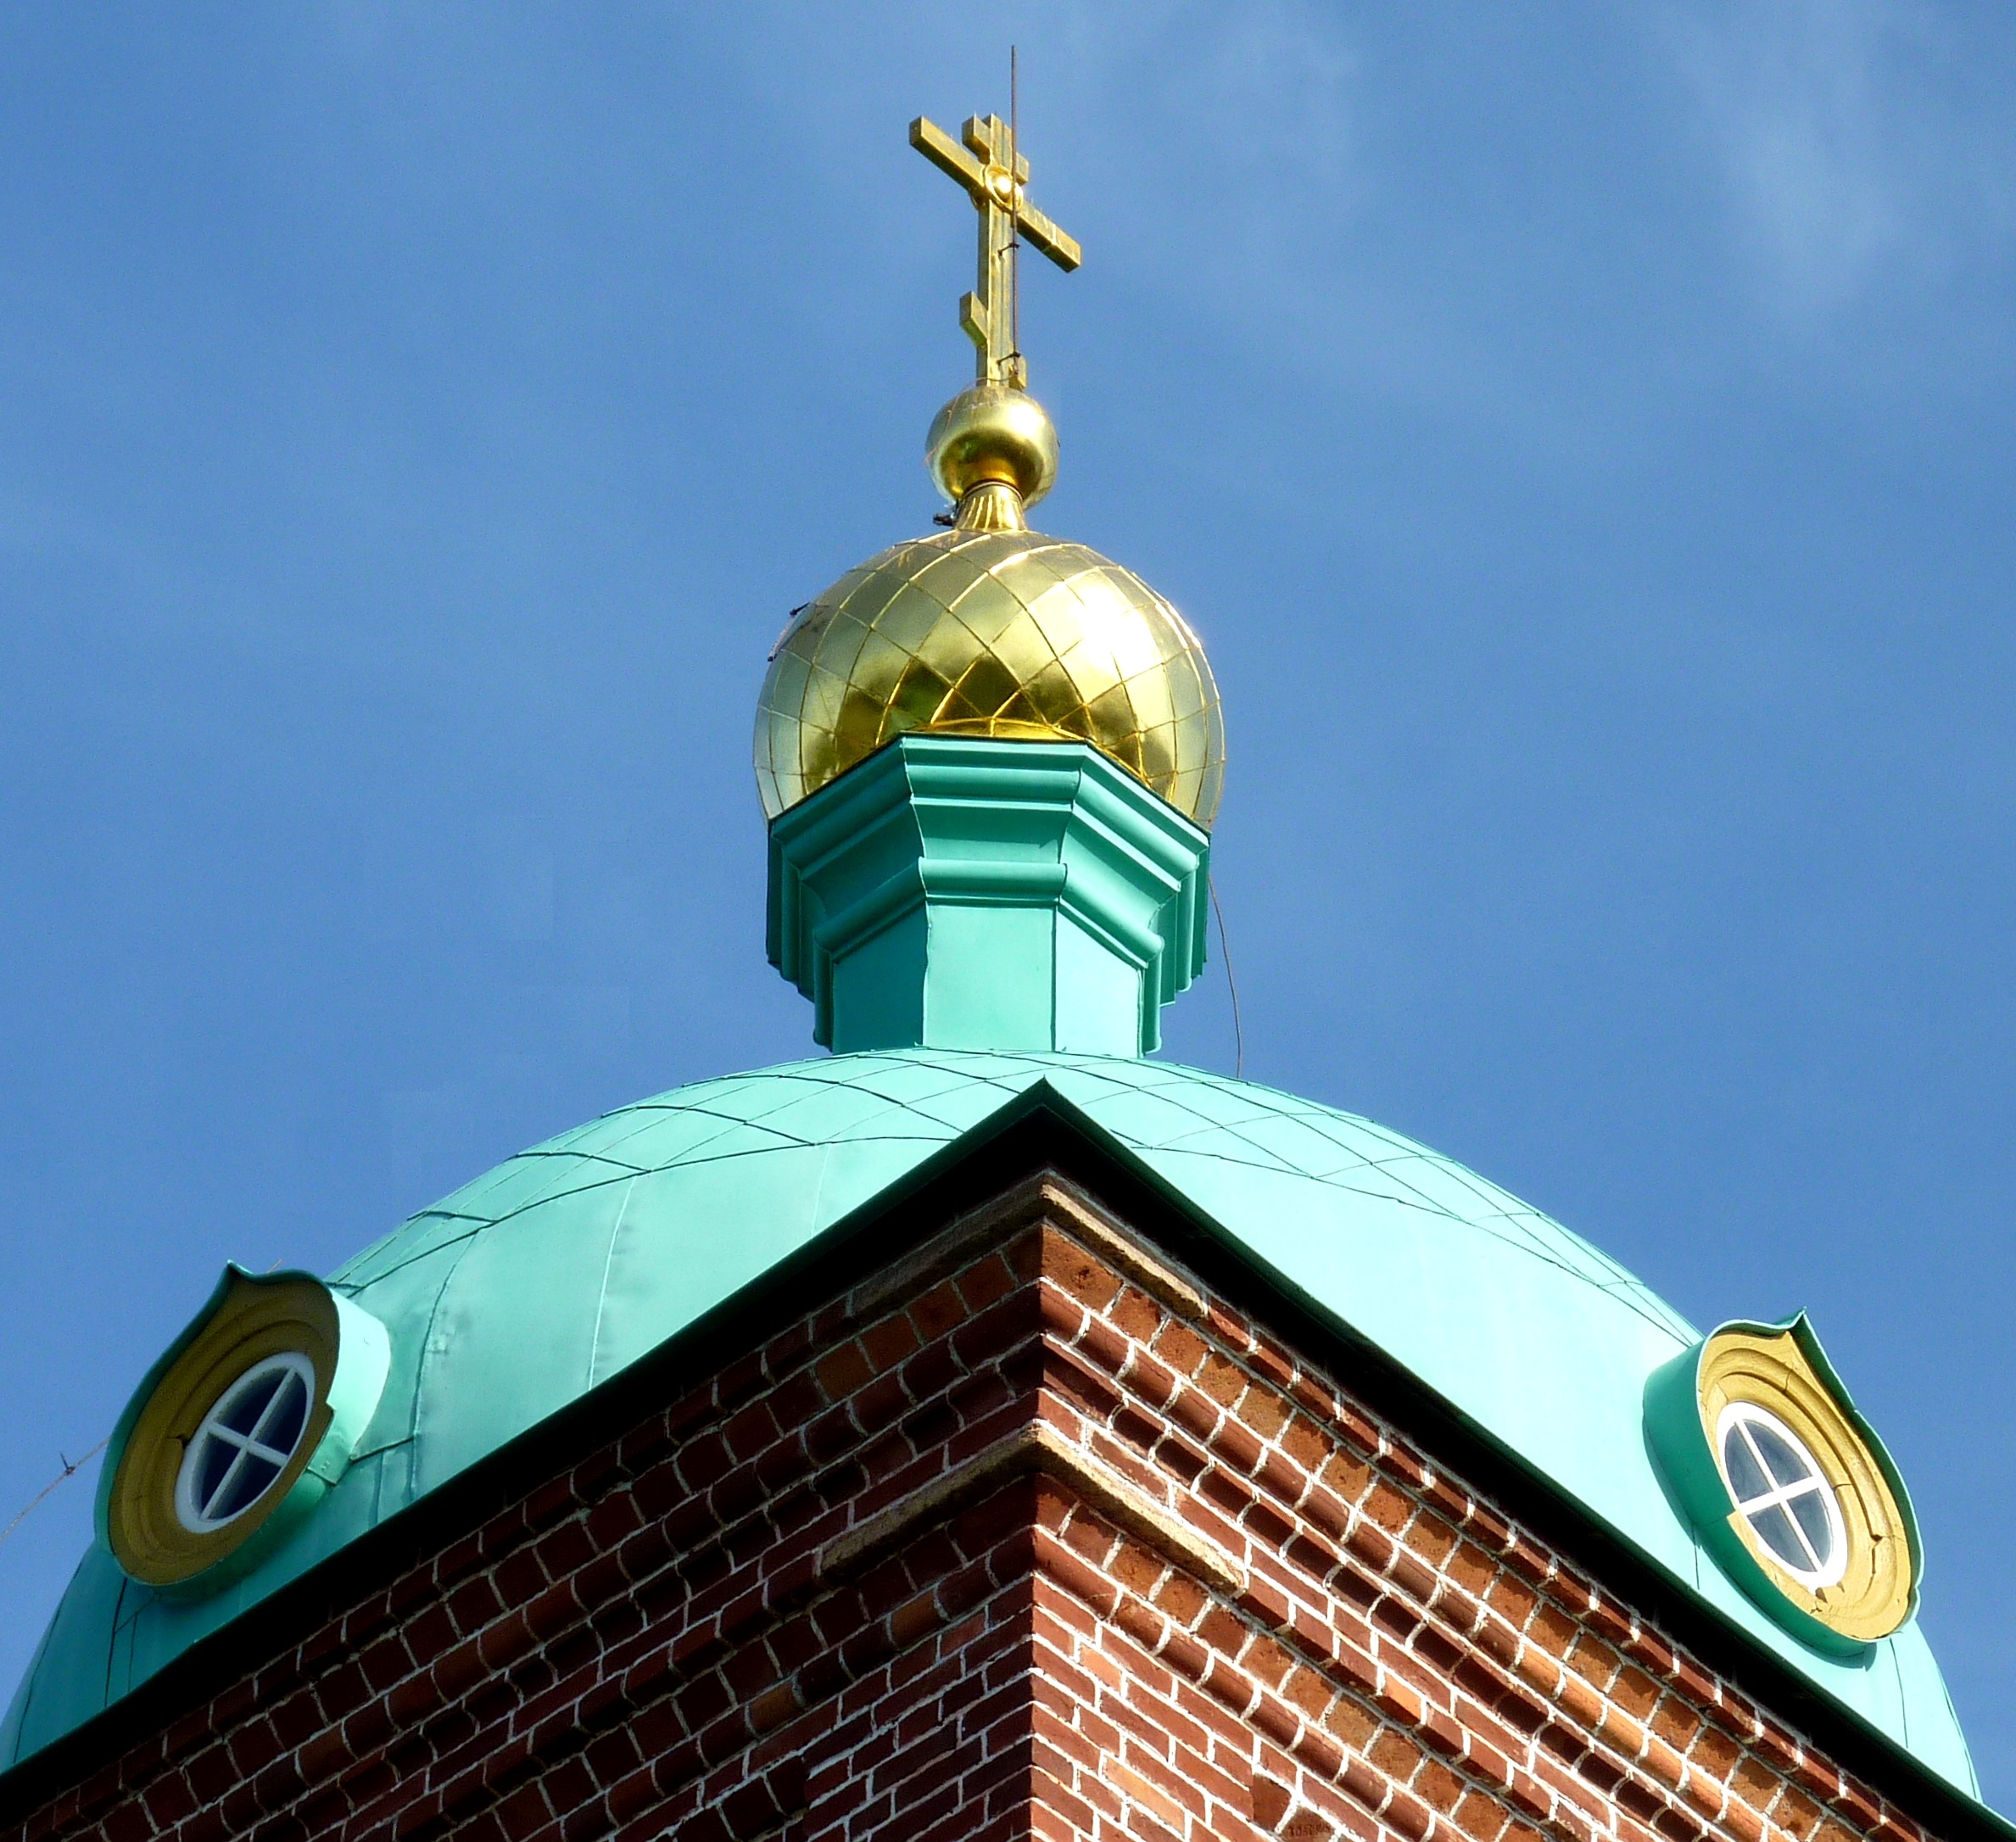 Church tower with golden spire